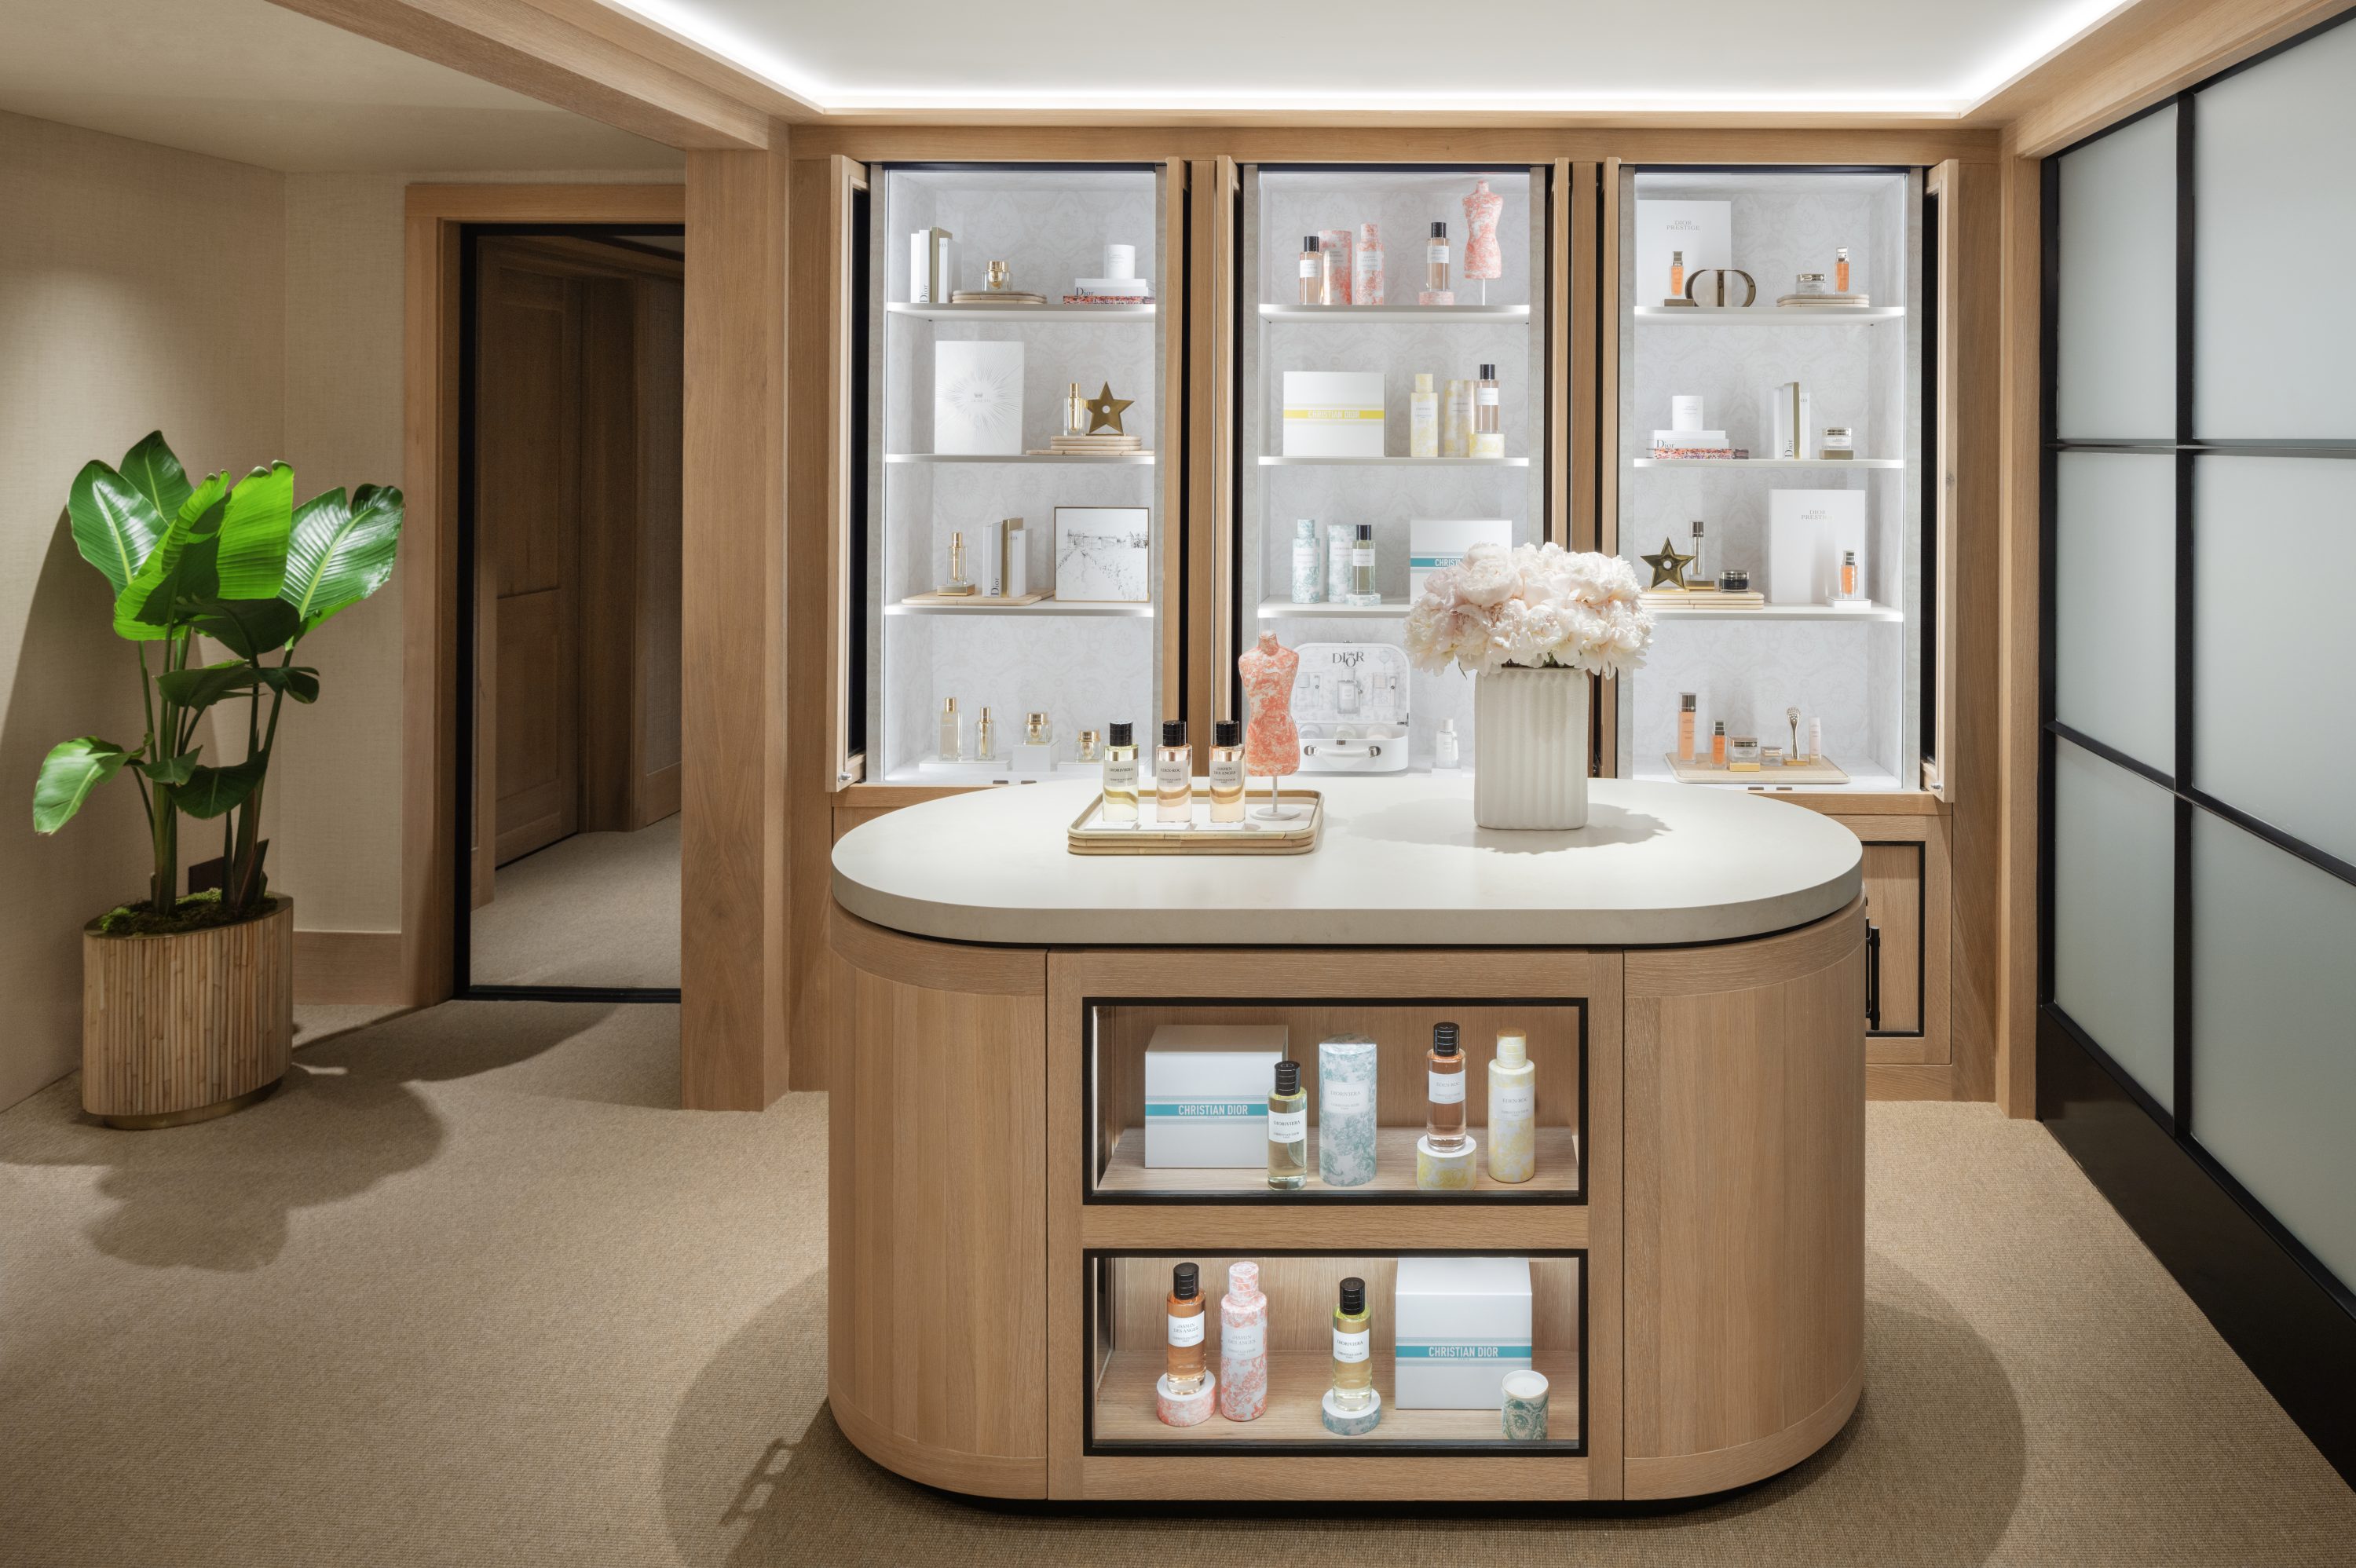 Dior Opens Dioriviera and Spa Residency at The Little Nell in Aspen